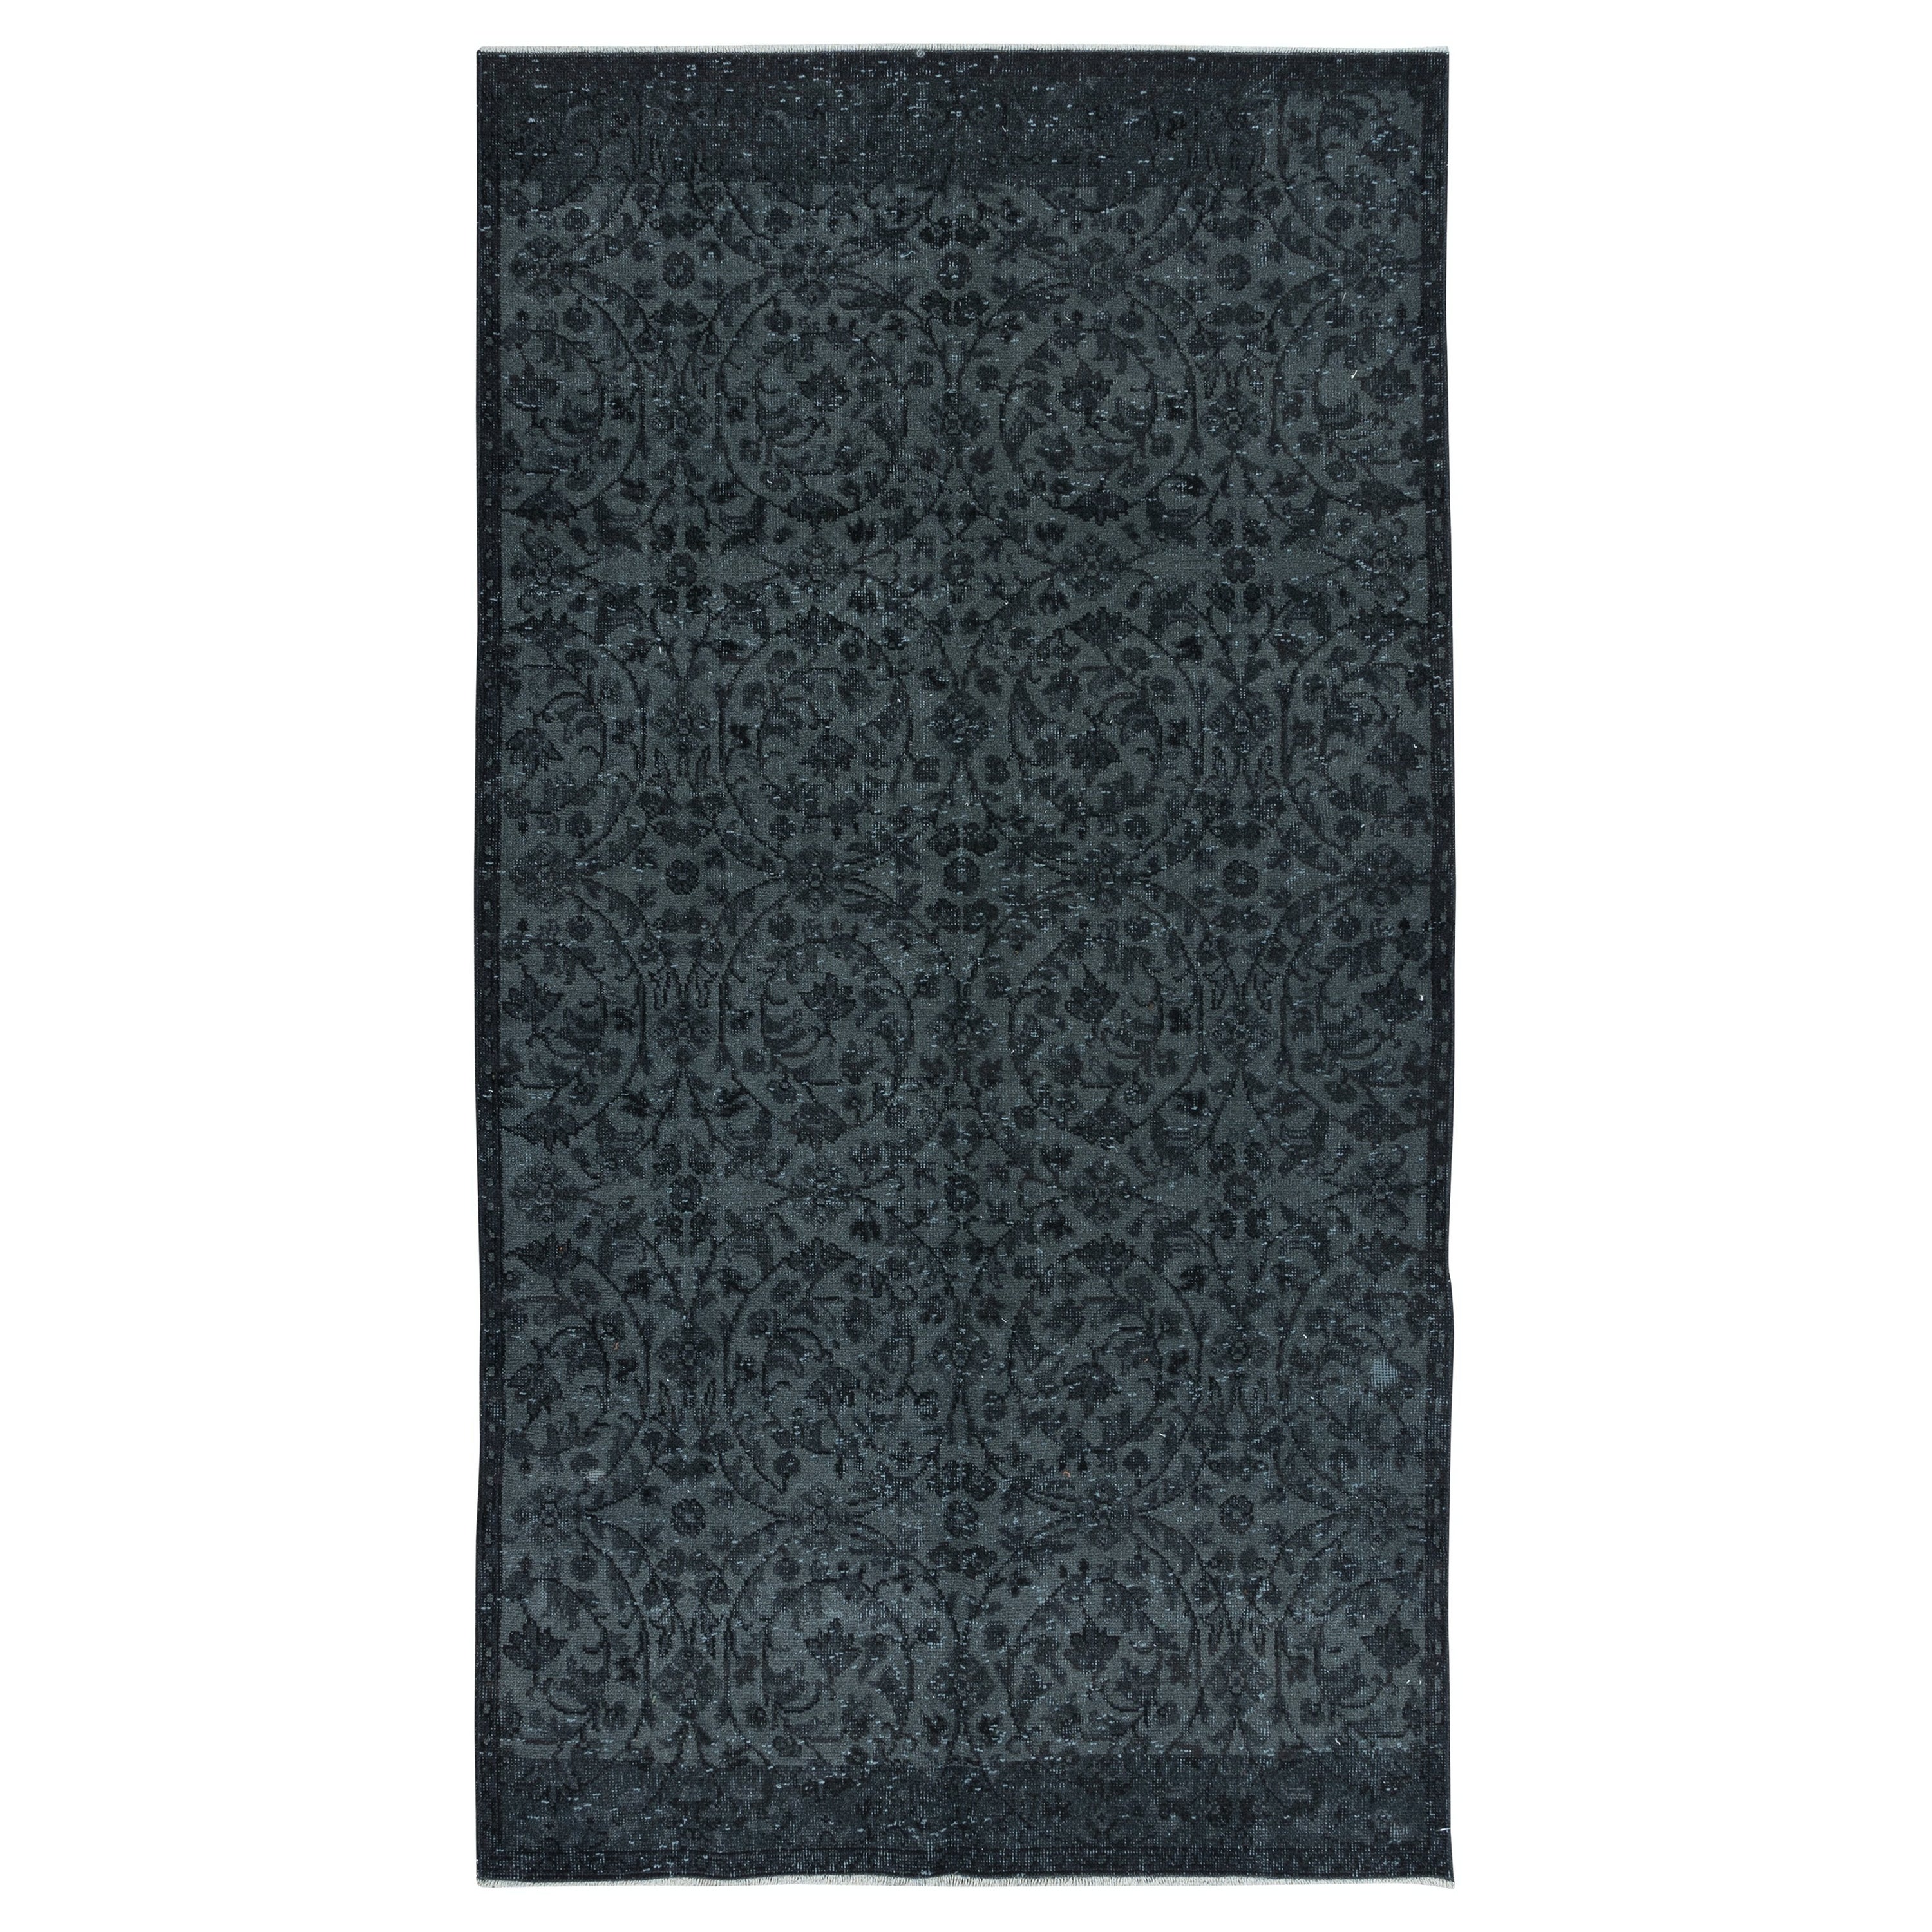 4.7x8.8 Ft Floral Area Rug in Black & Gray, Handknotted and Handwoven in Turkey For Sale